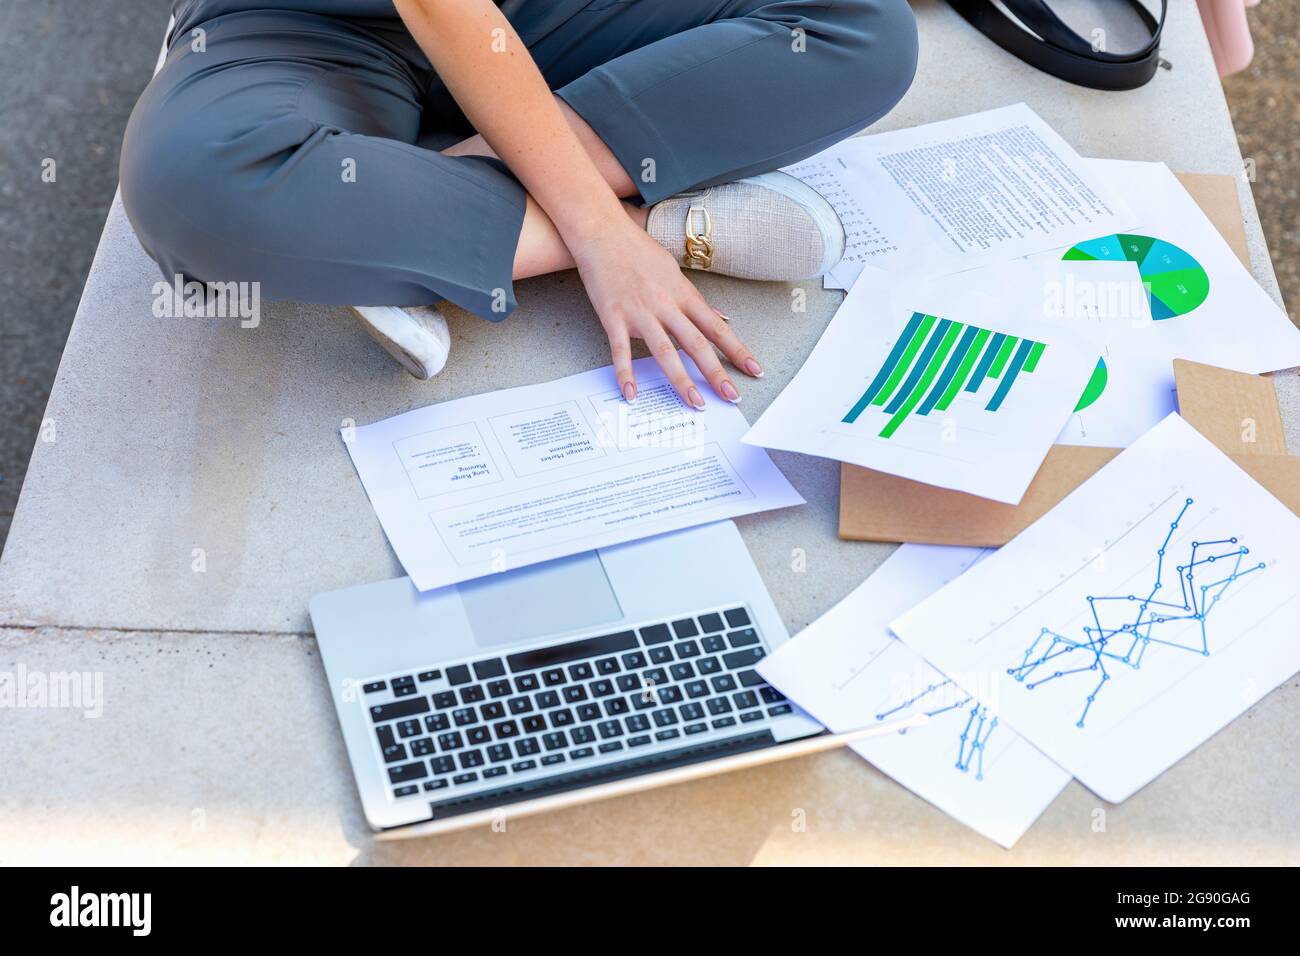 Businesswoman analyzing data in front of laptop on bench Stock Photo